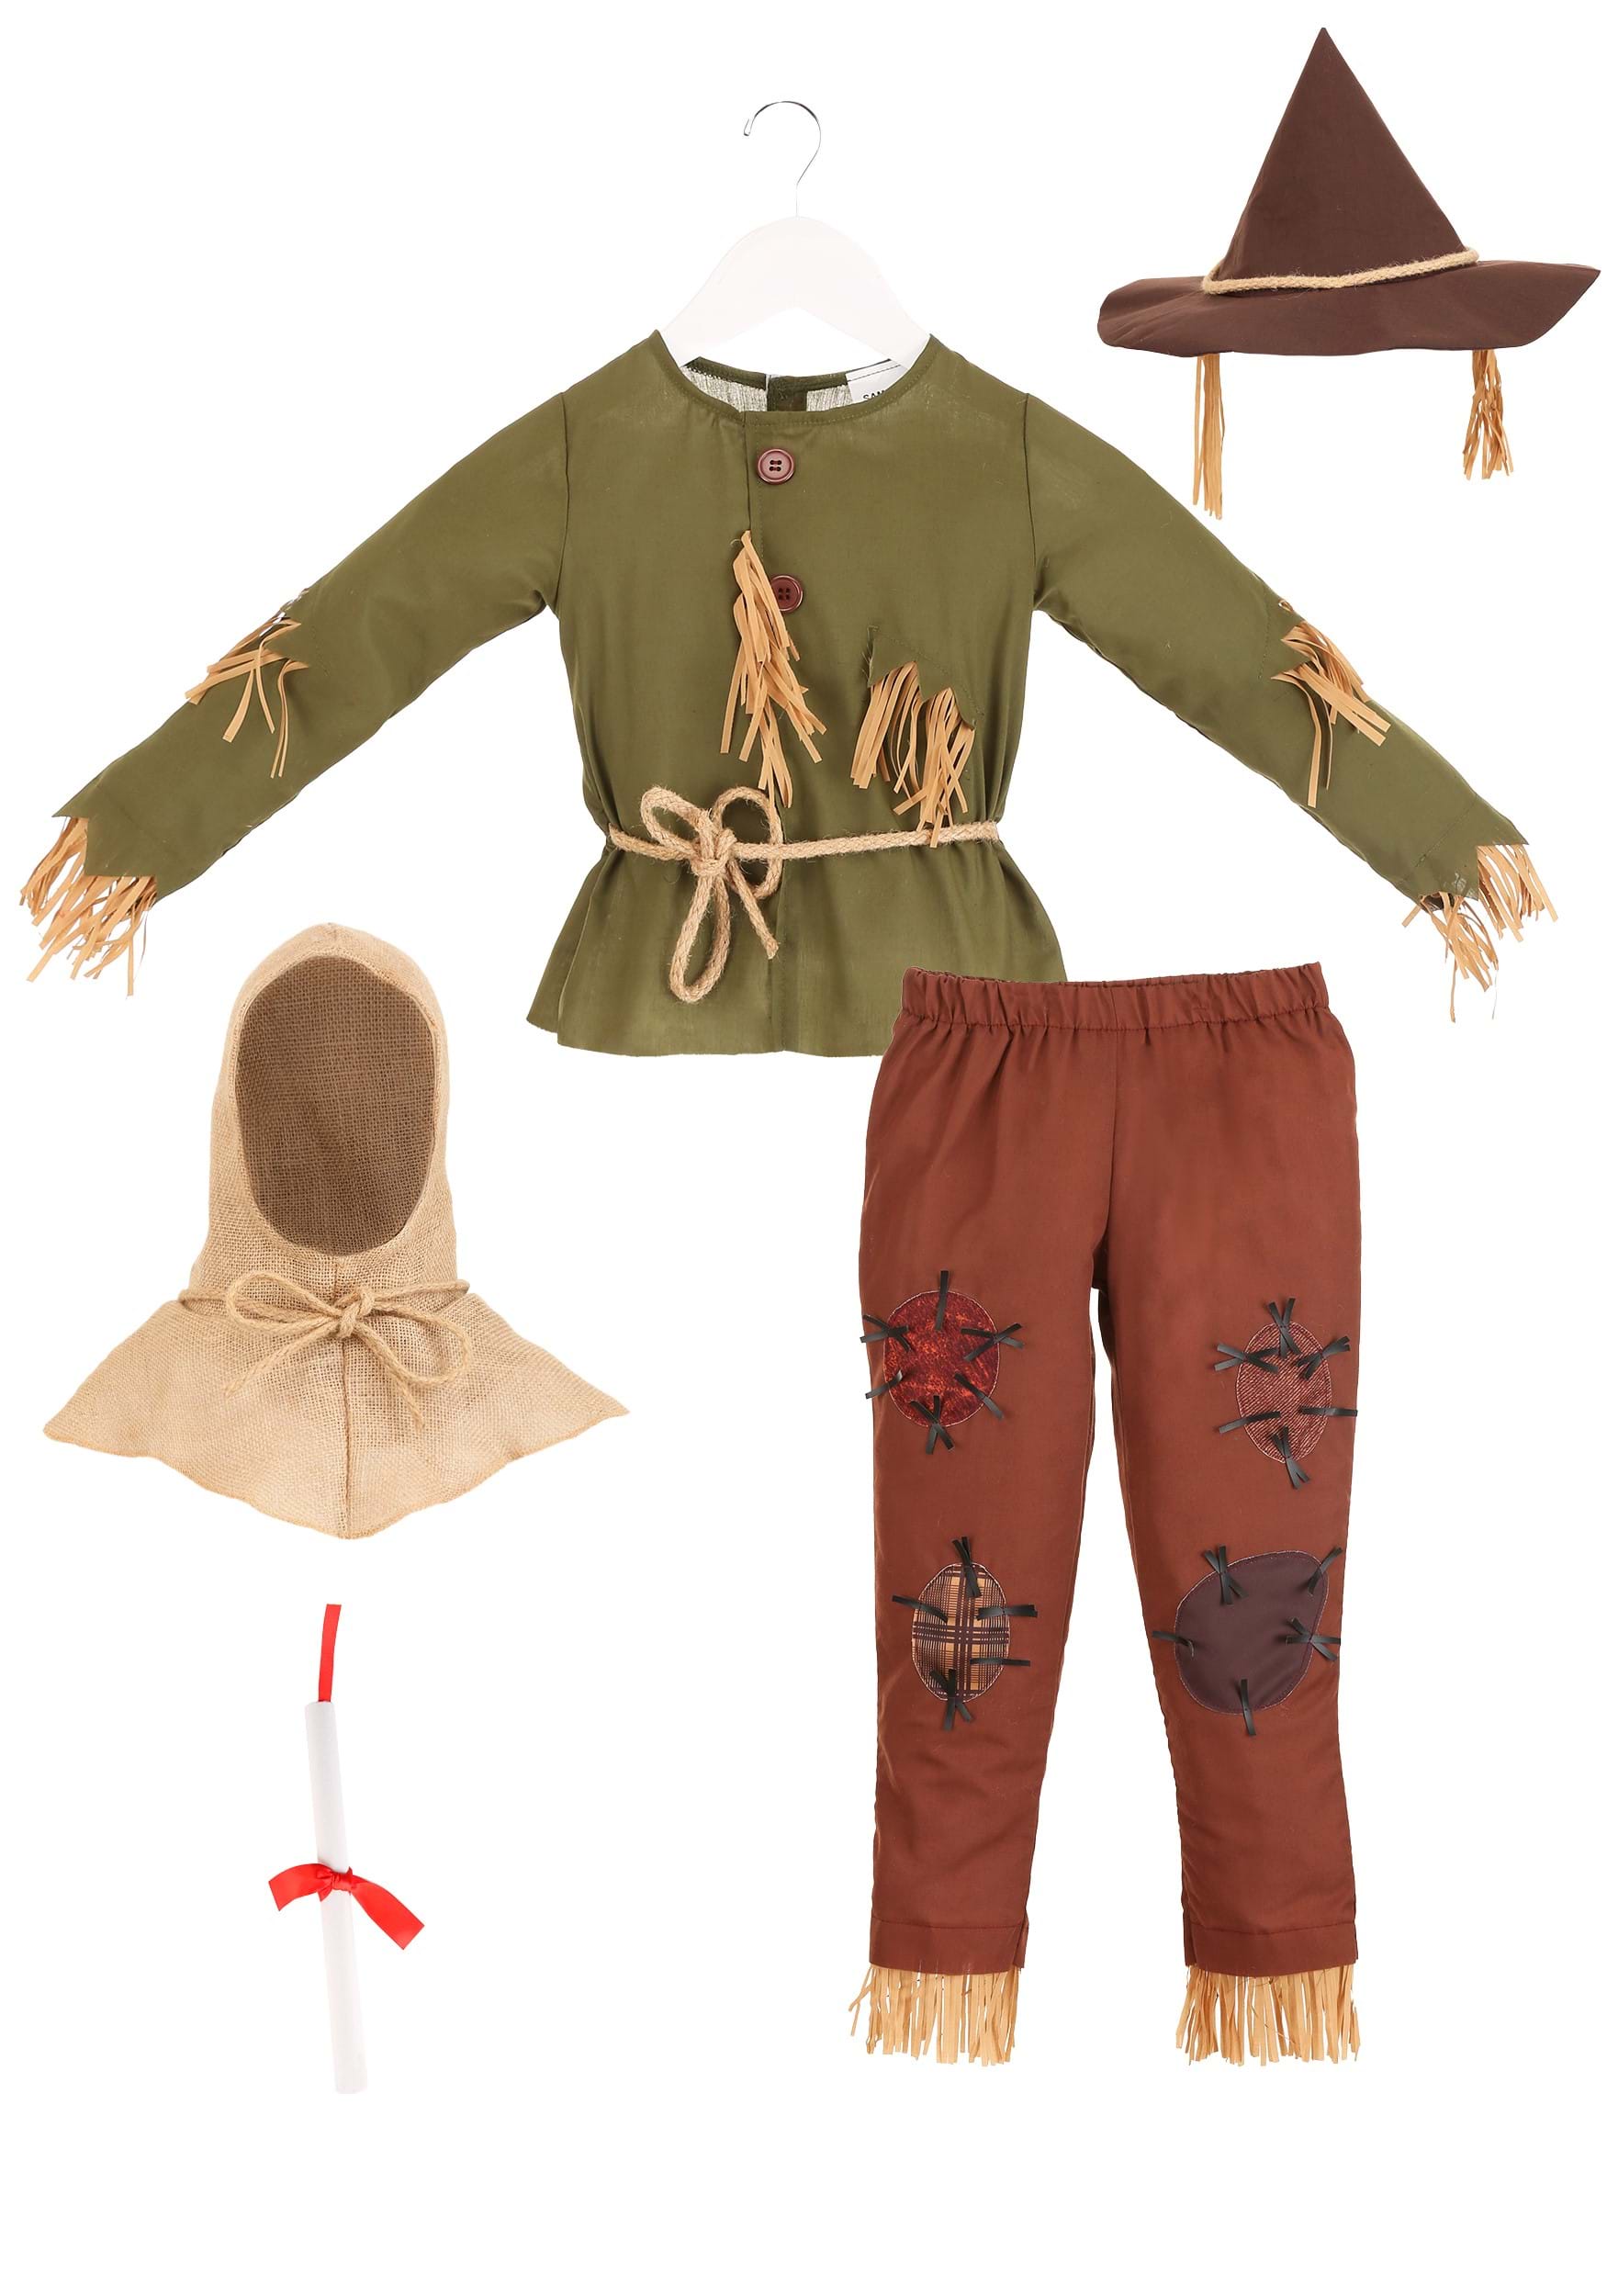 https://images.fun.com/products/64111/2-1-208558/toddler-wizard-of-oz-scarecrow-costume-alt-8.jpg